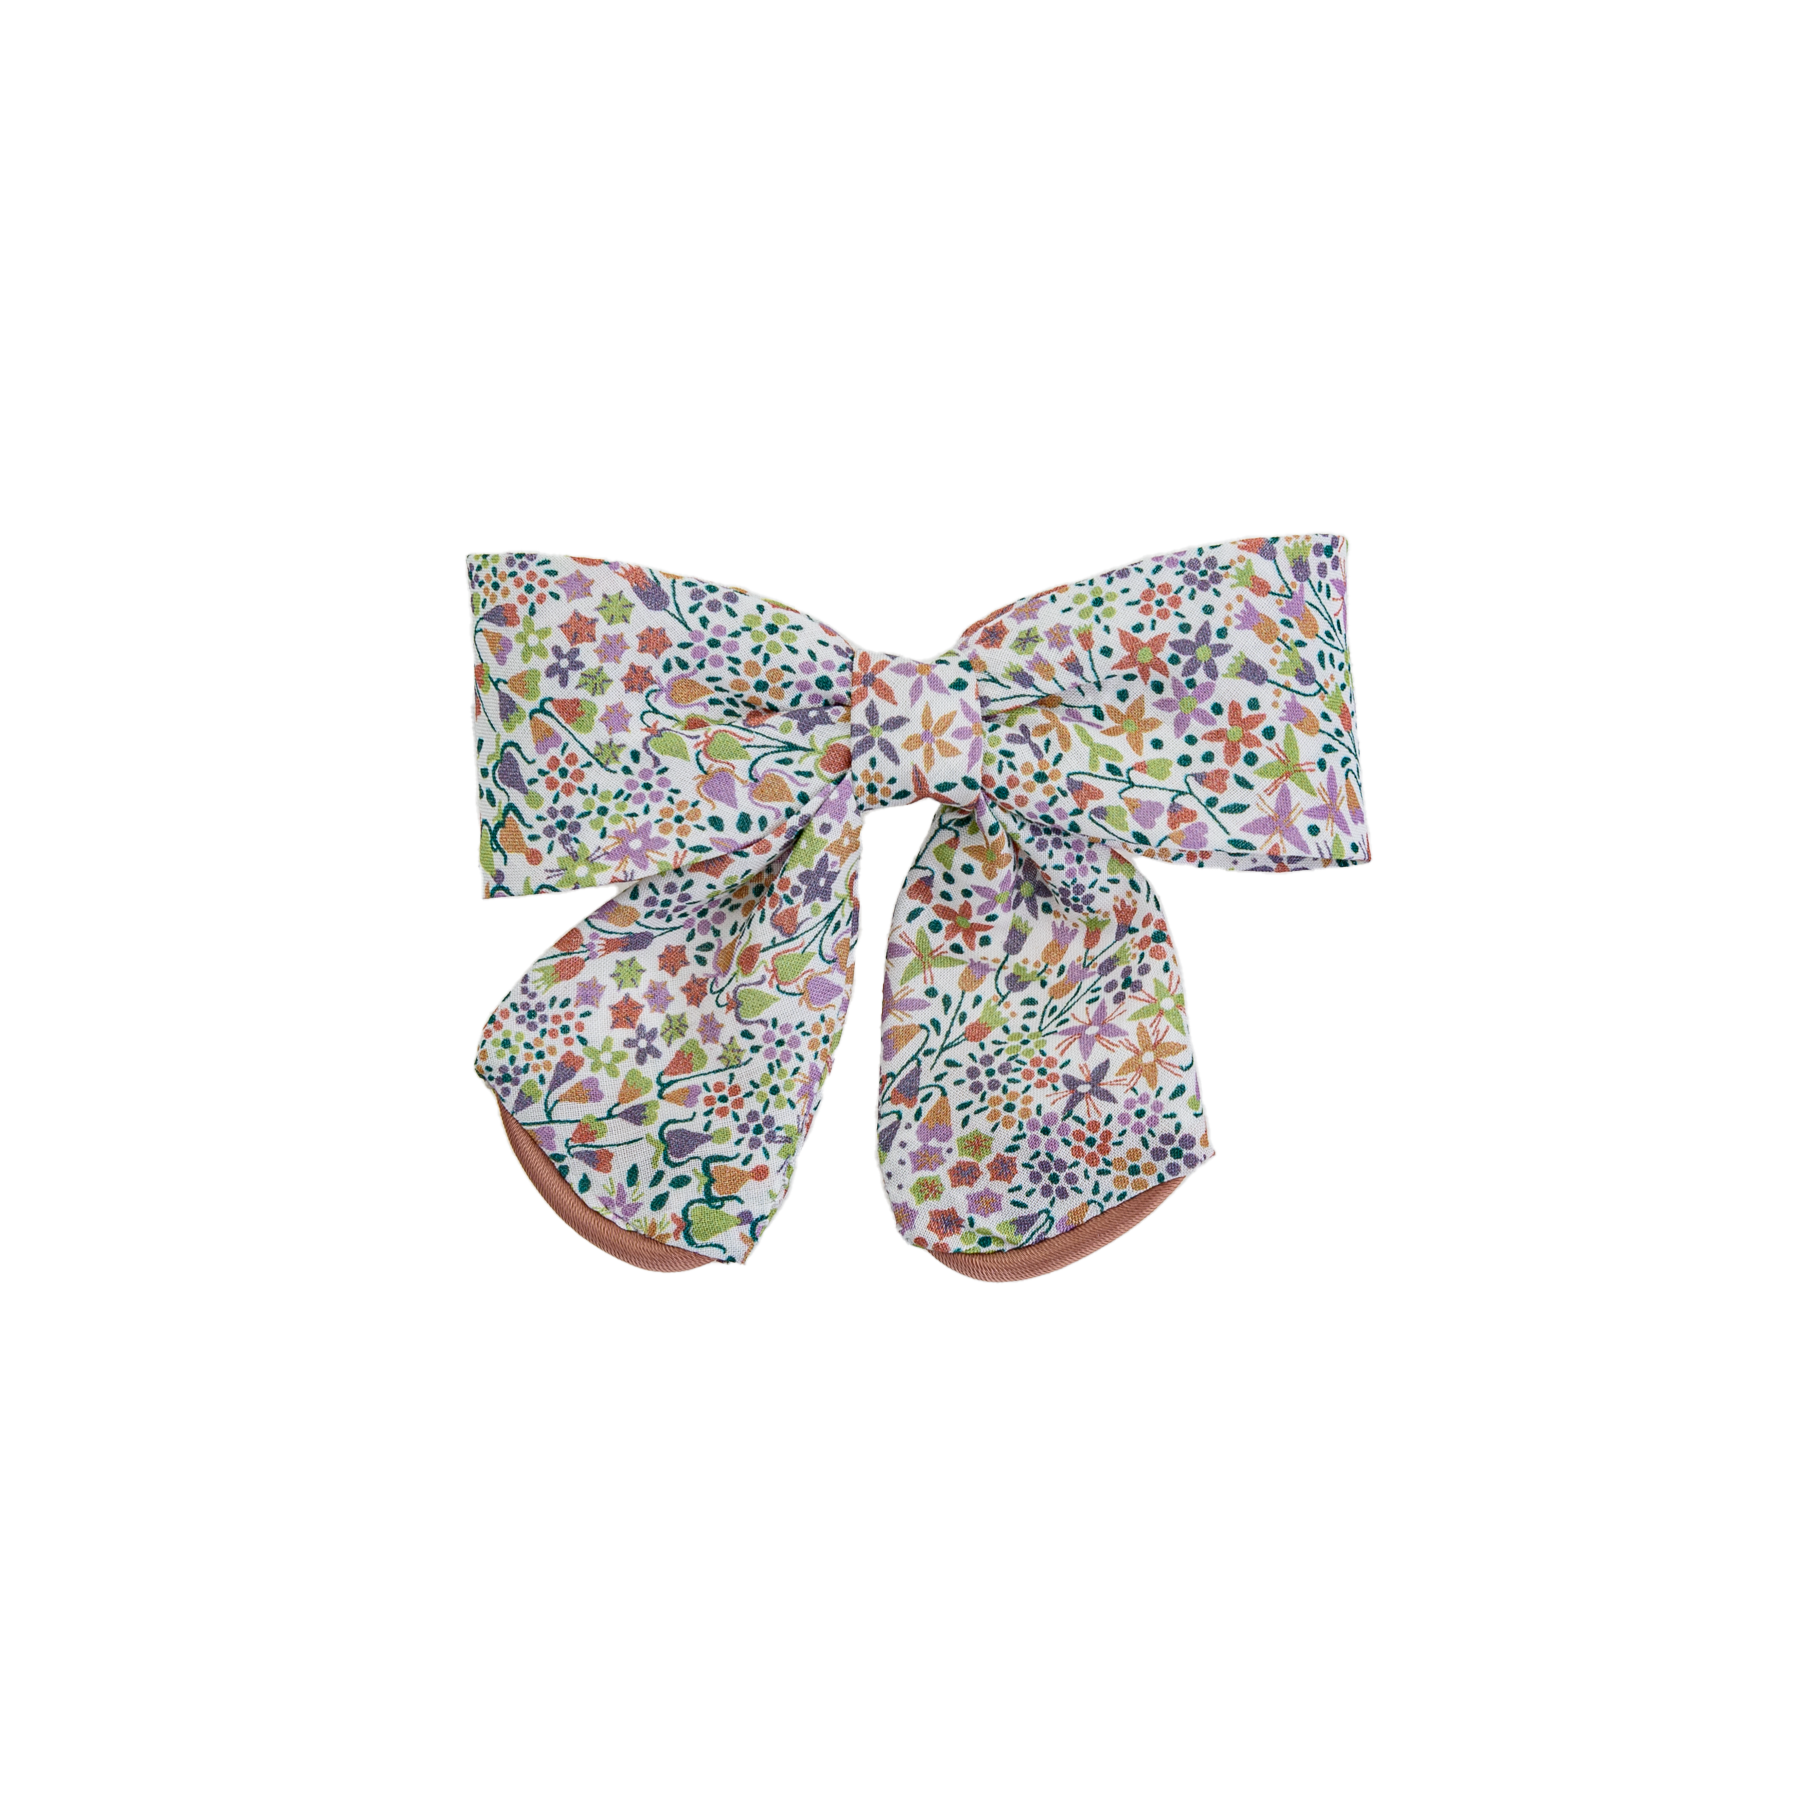 Image of Small Luxury bow mw Liberty Eve from Bon Dep Icons